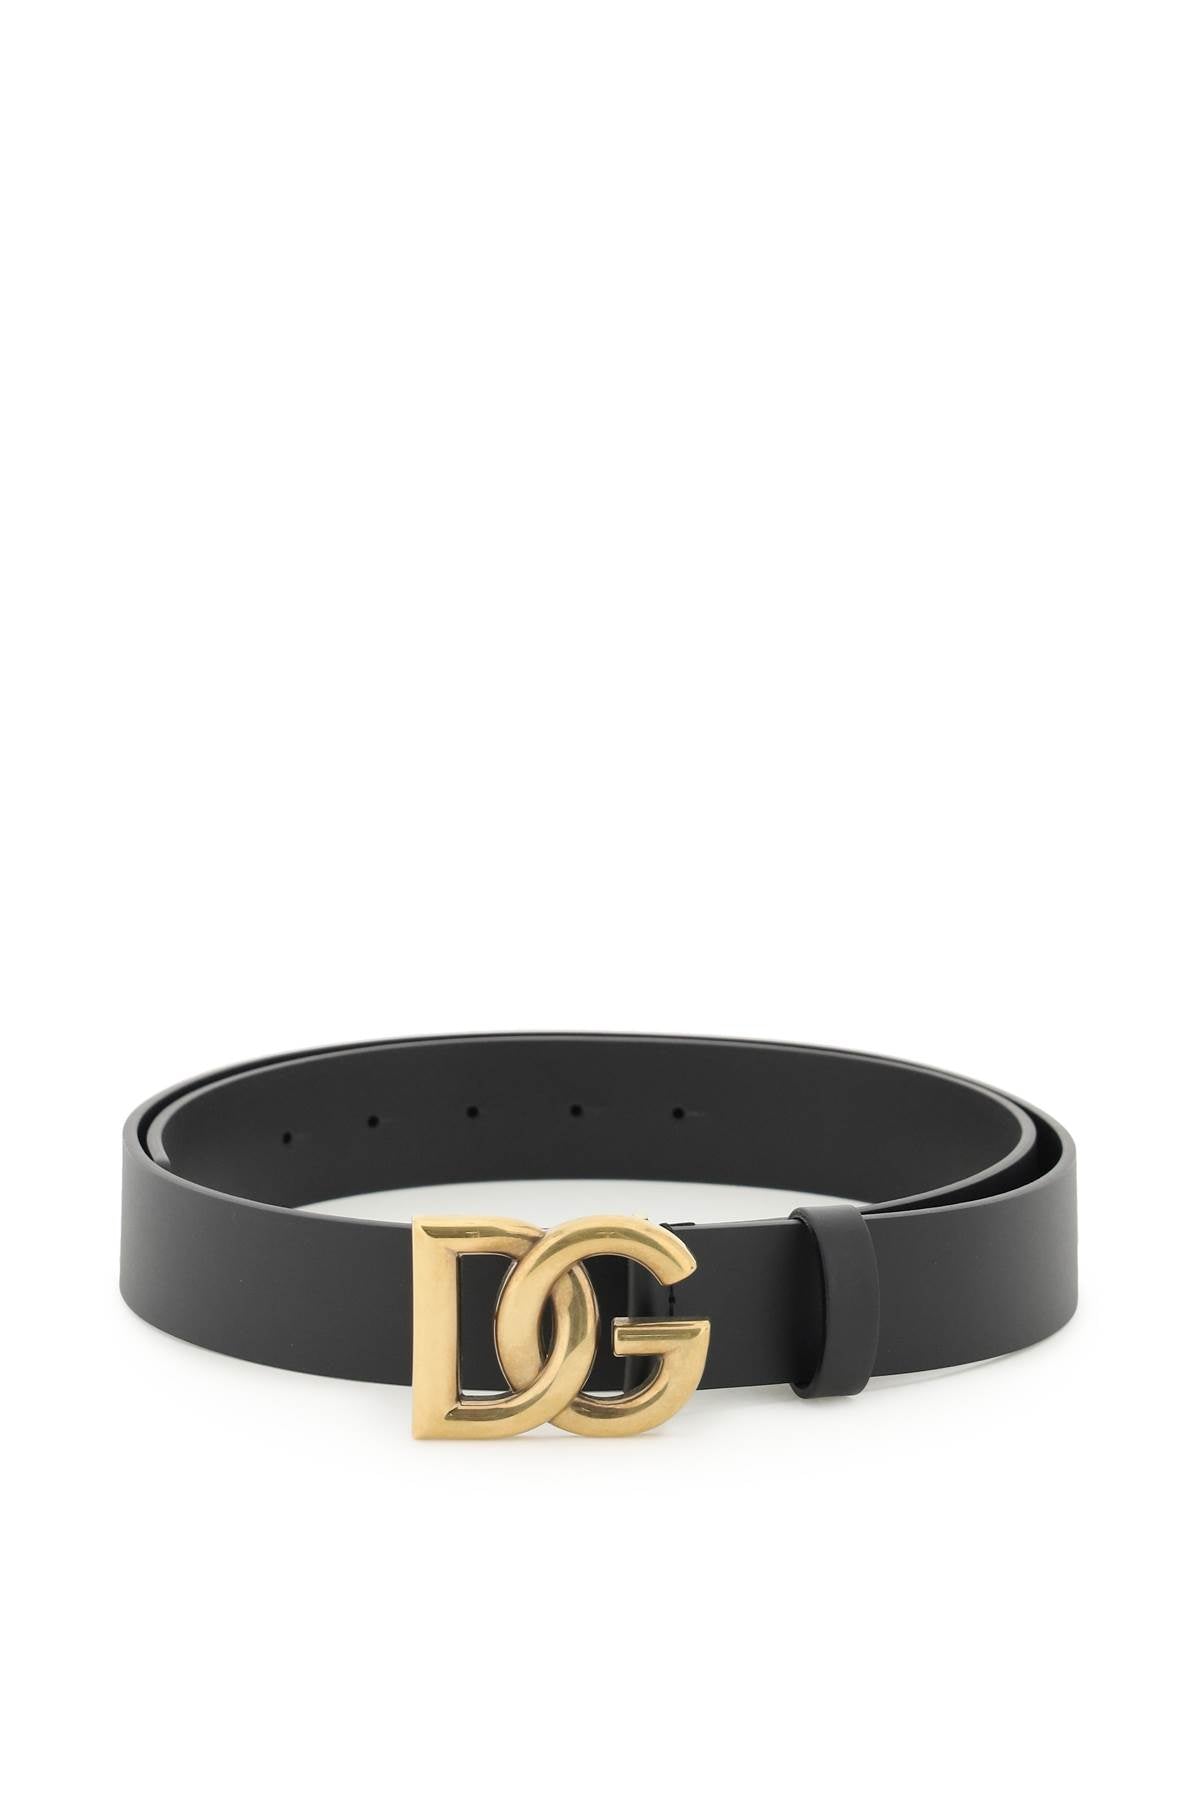 Dolce & gabbana lux leather belt with crossed dg logo-0